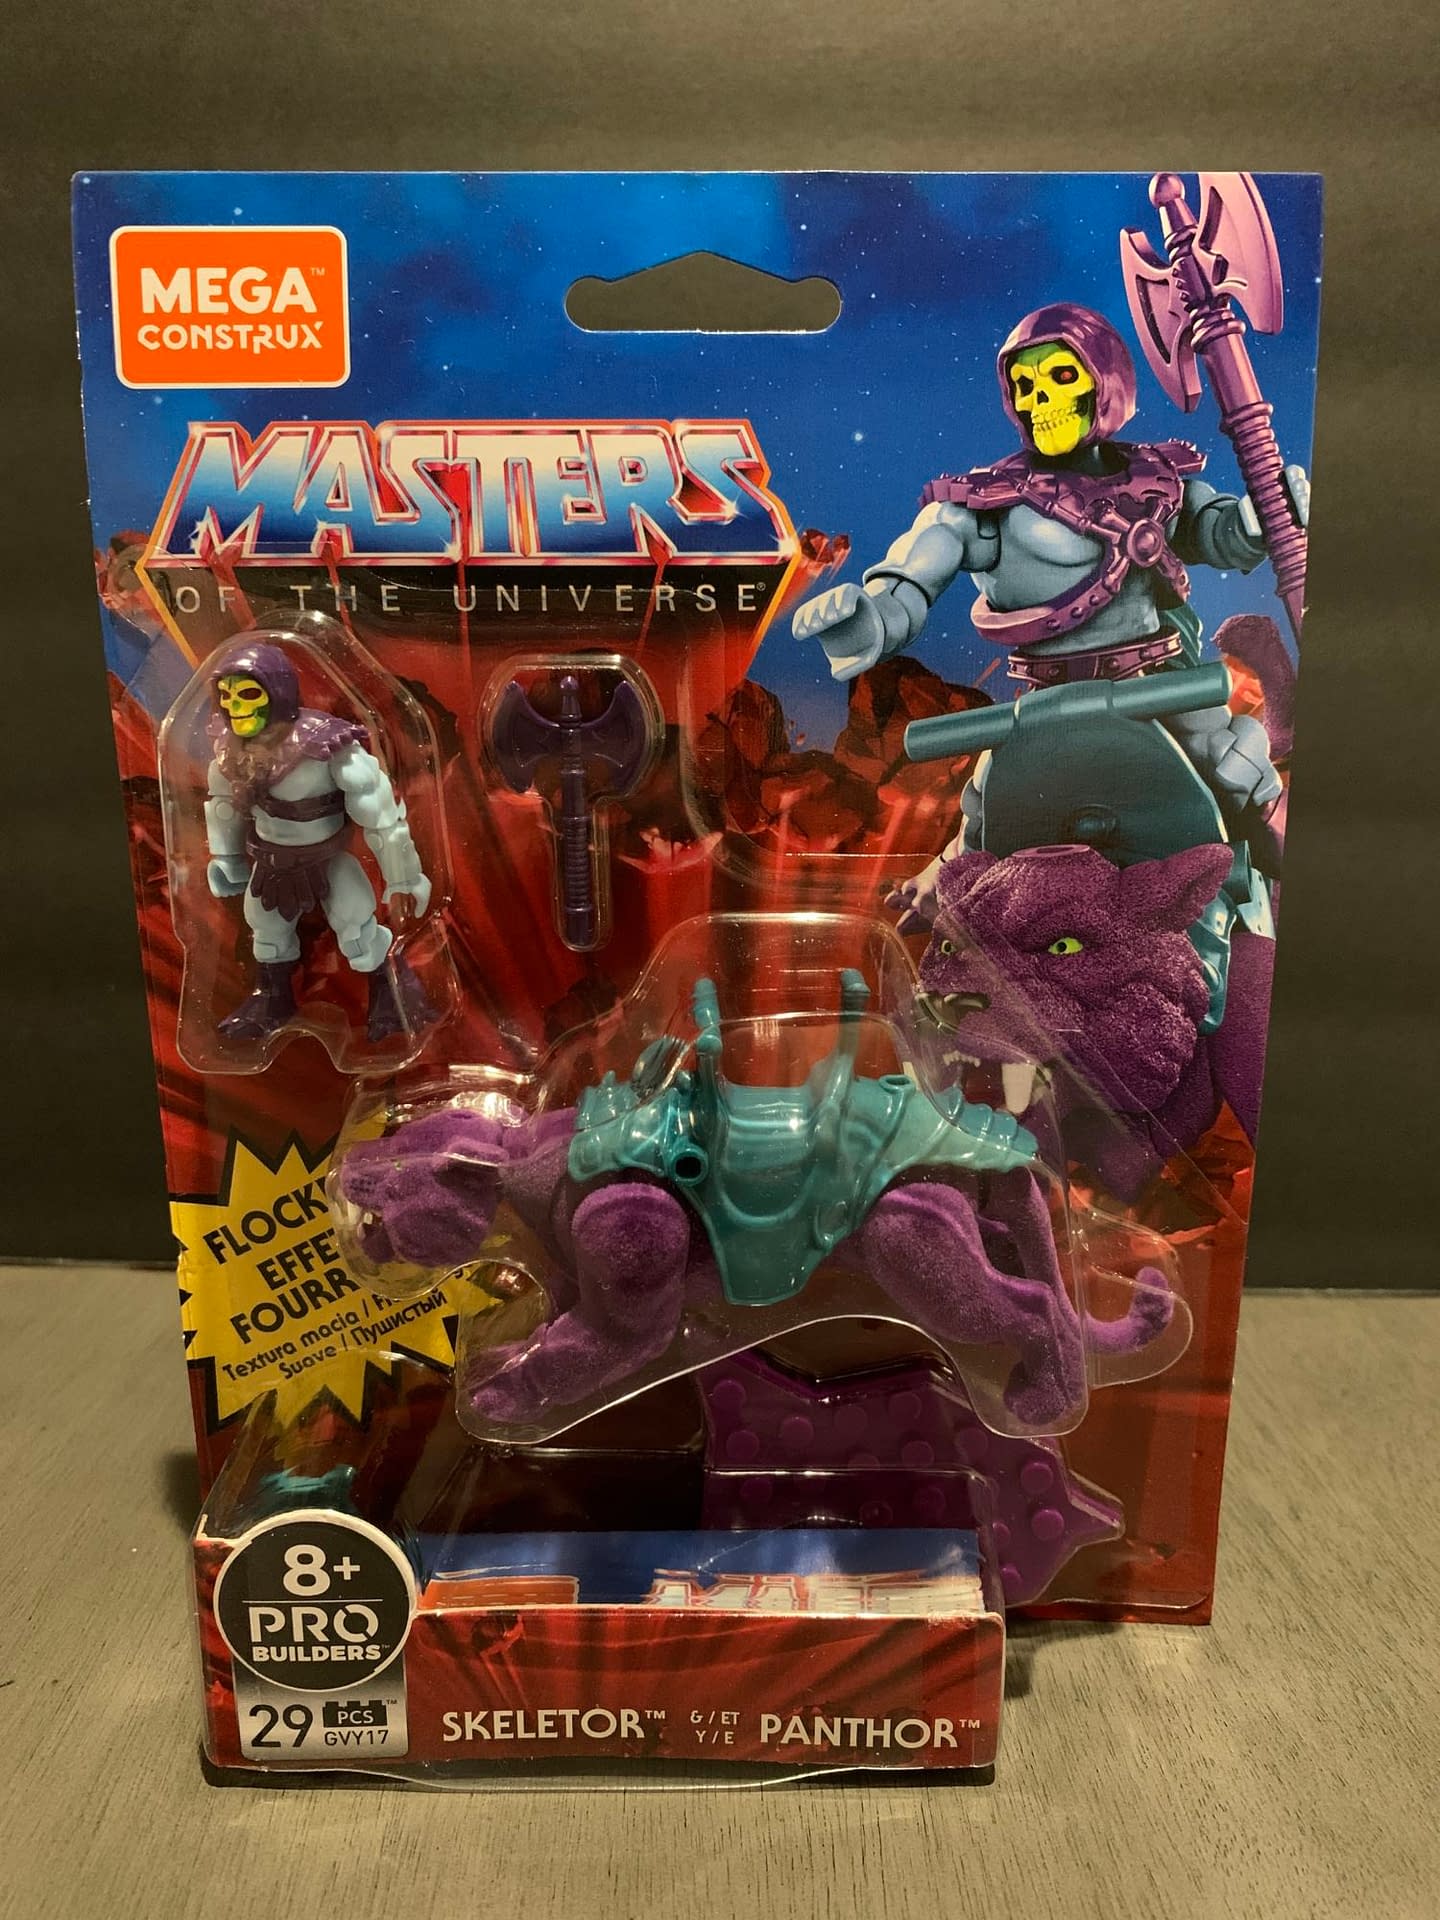 SKELETOR and PANTHER GVY17 MASTERS OF THE UNIVERSE MEGA CONSTRUX 